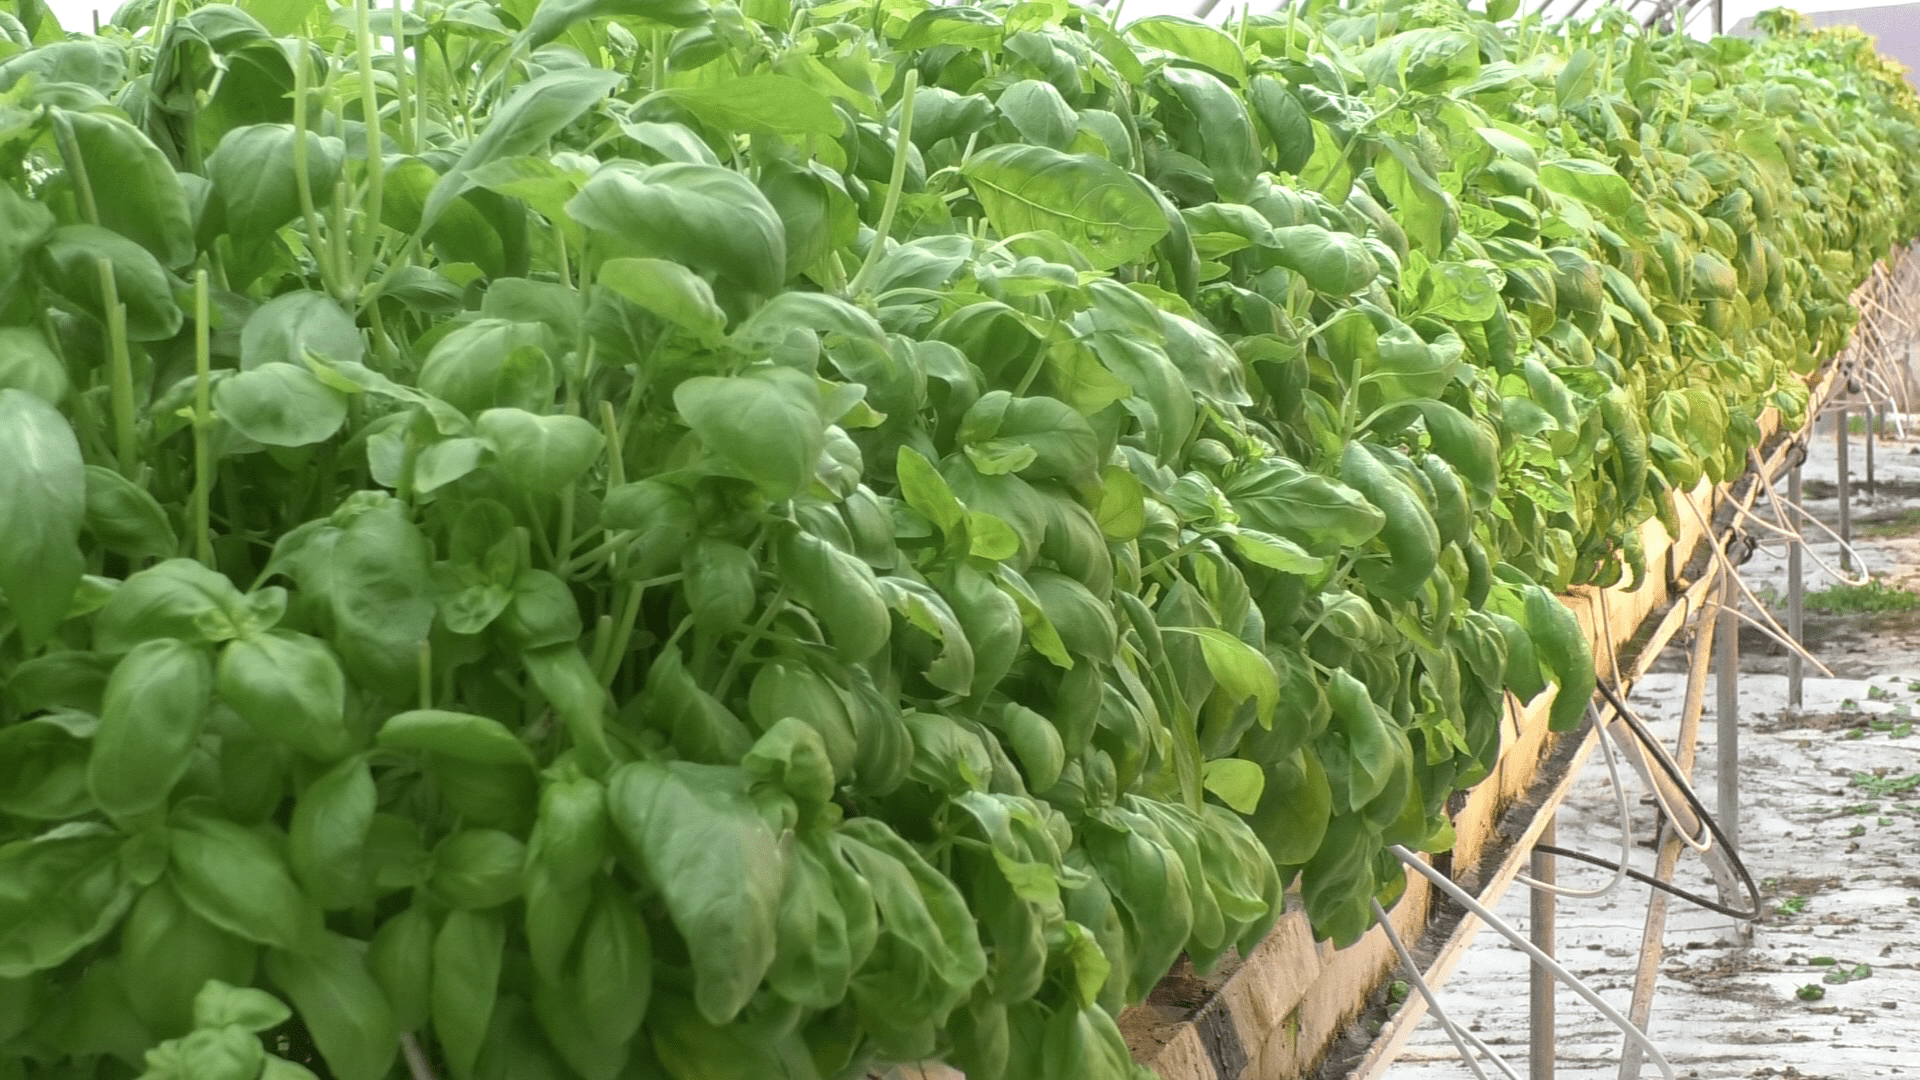 Basil growing in Bay Produce greenhouses in Superior.